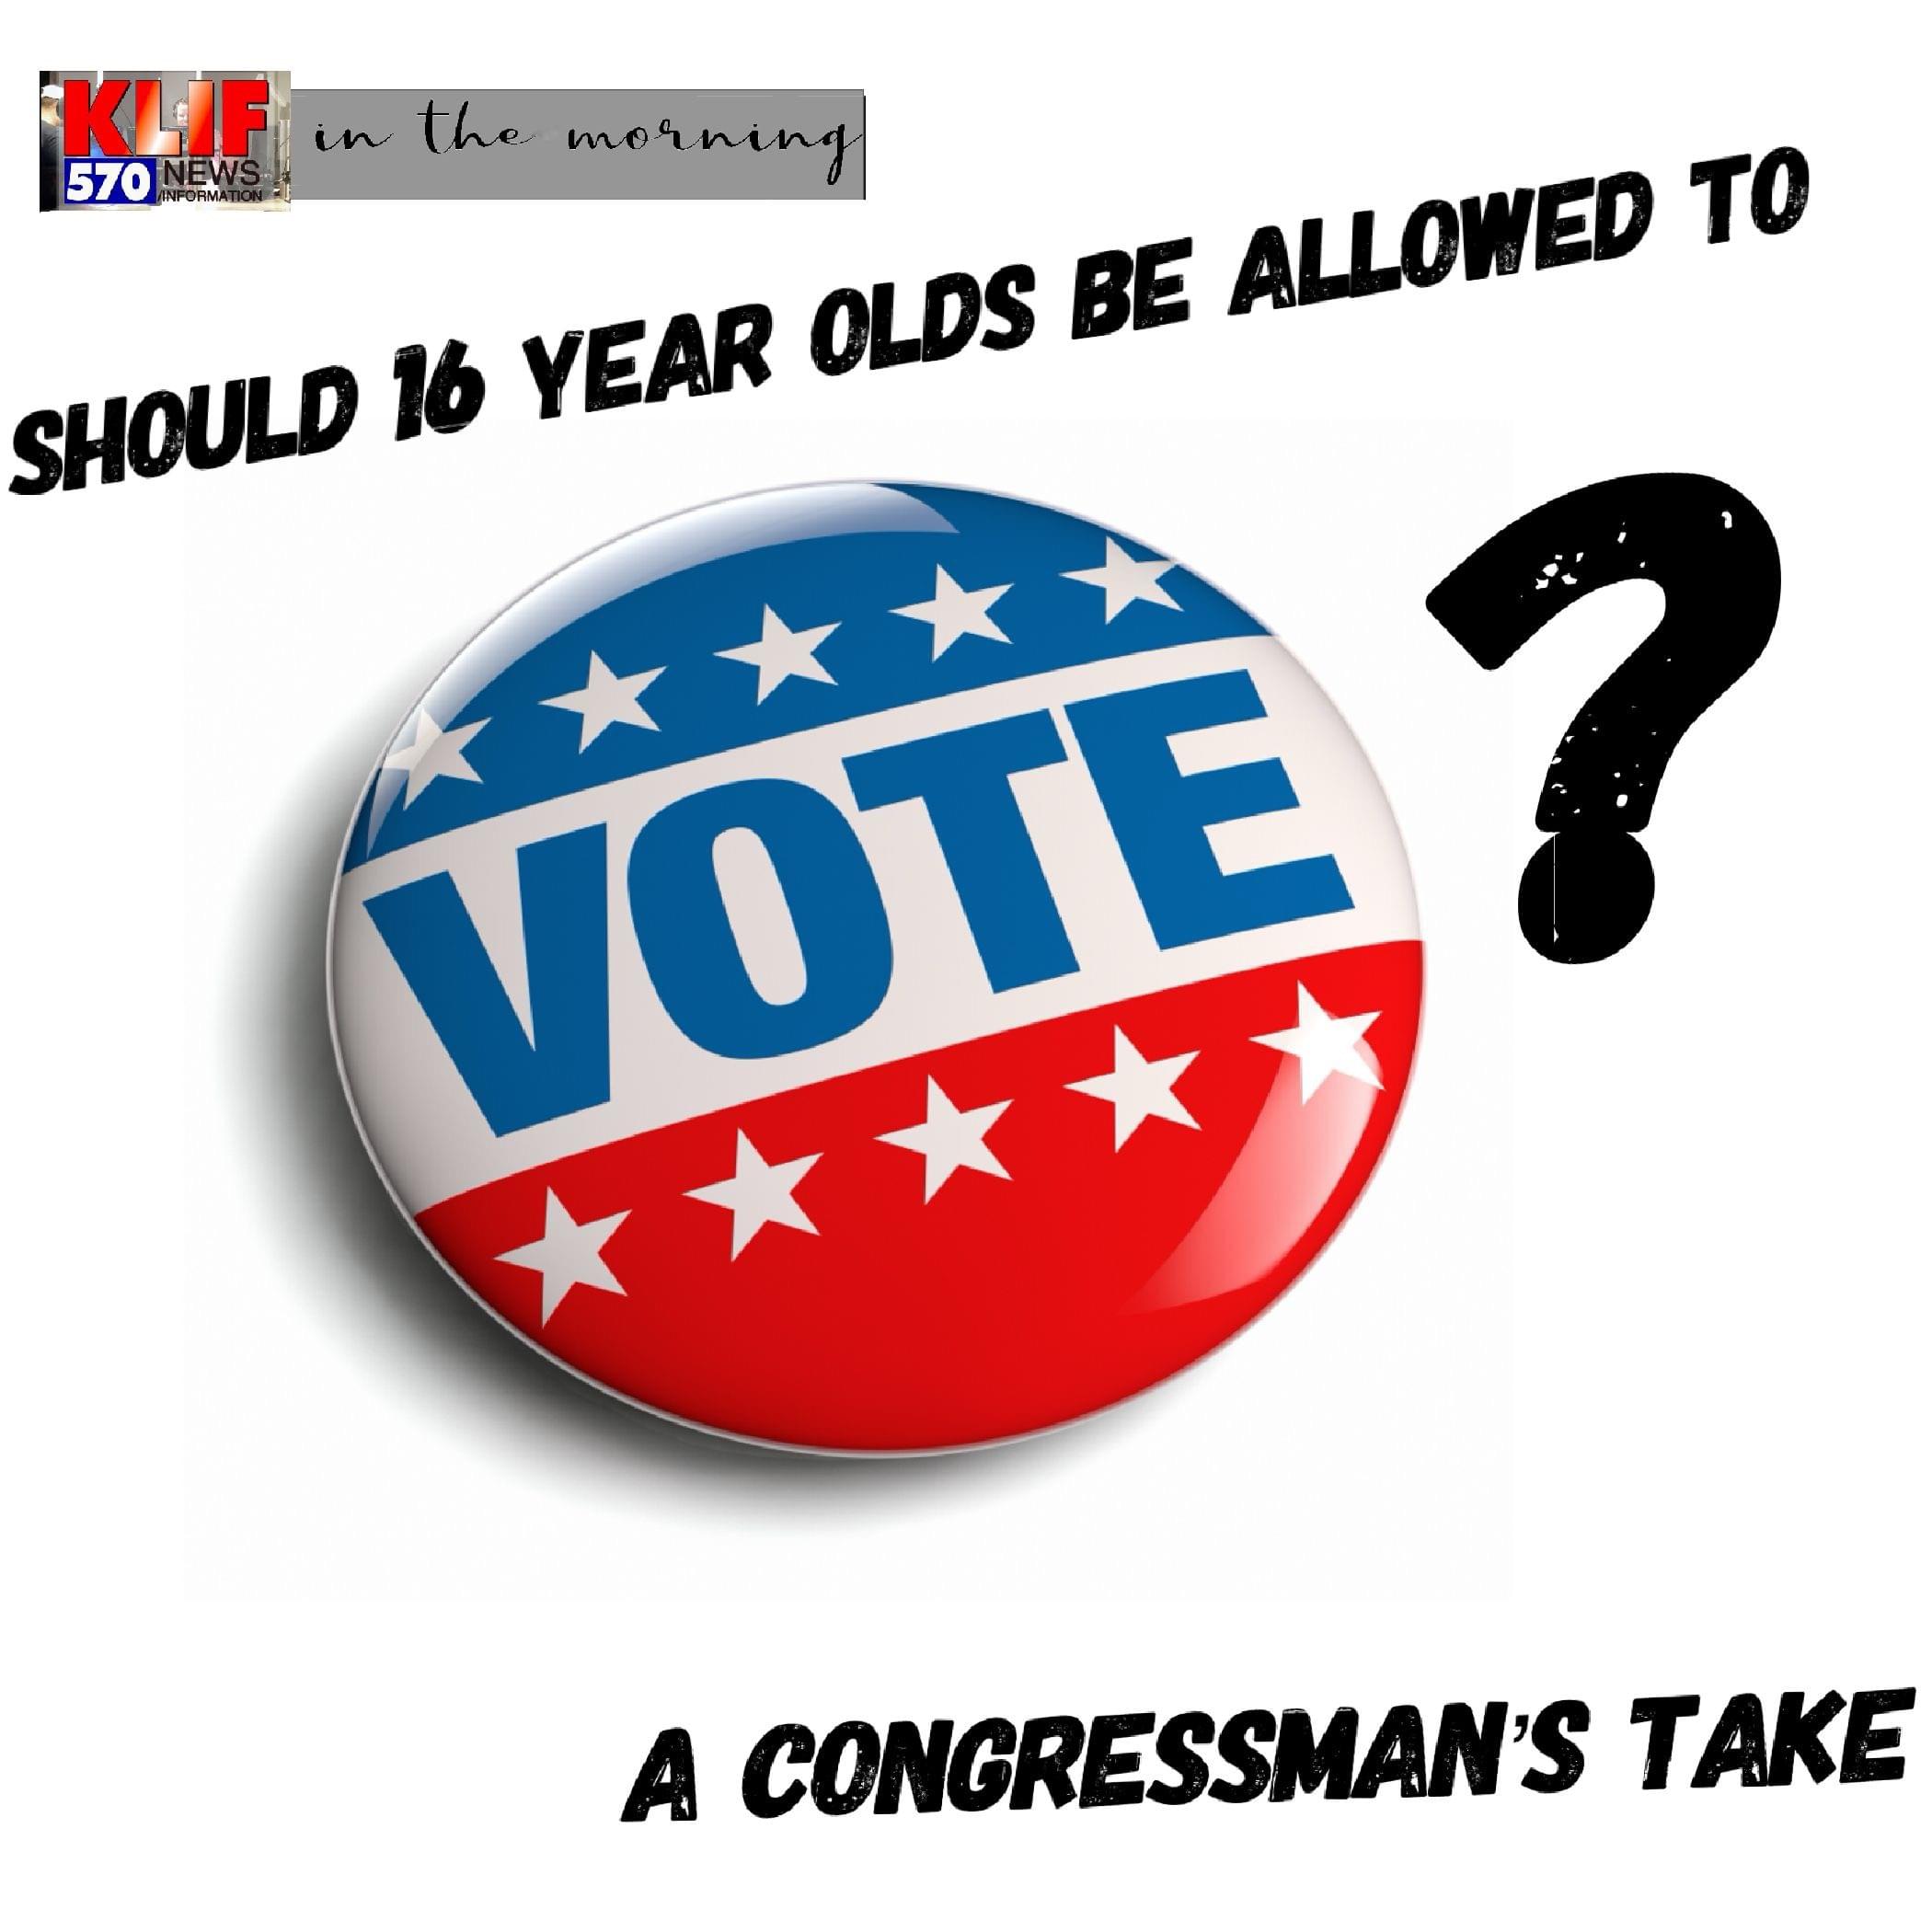 Should 16 Year Olds Be Allowed to Vote?